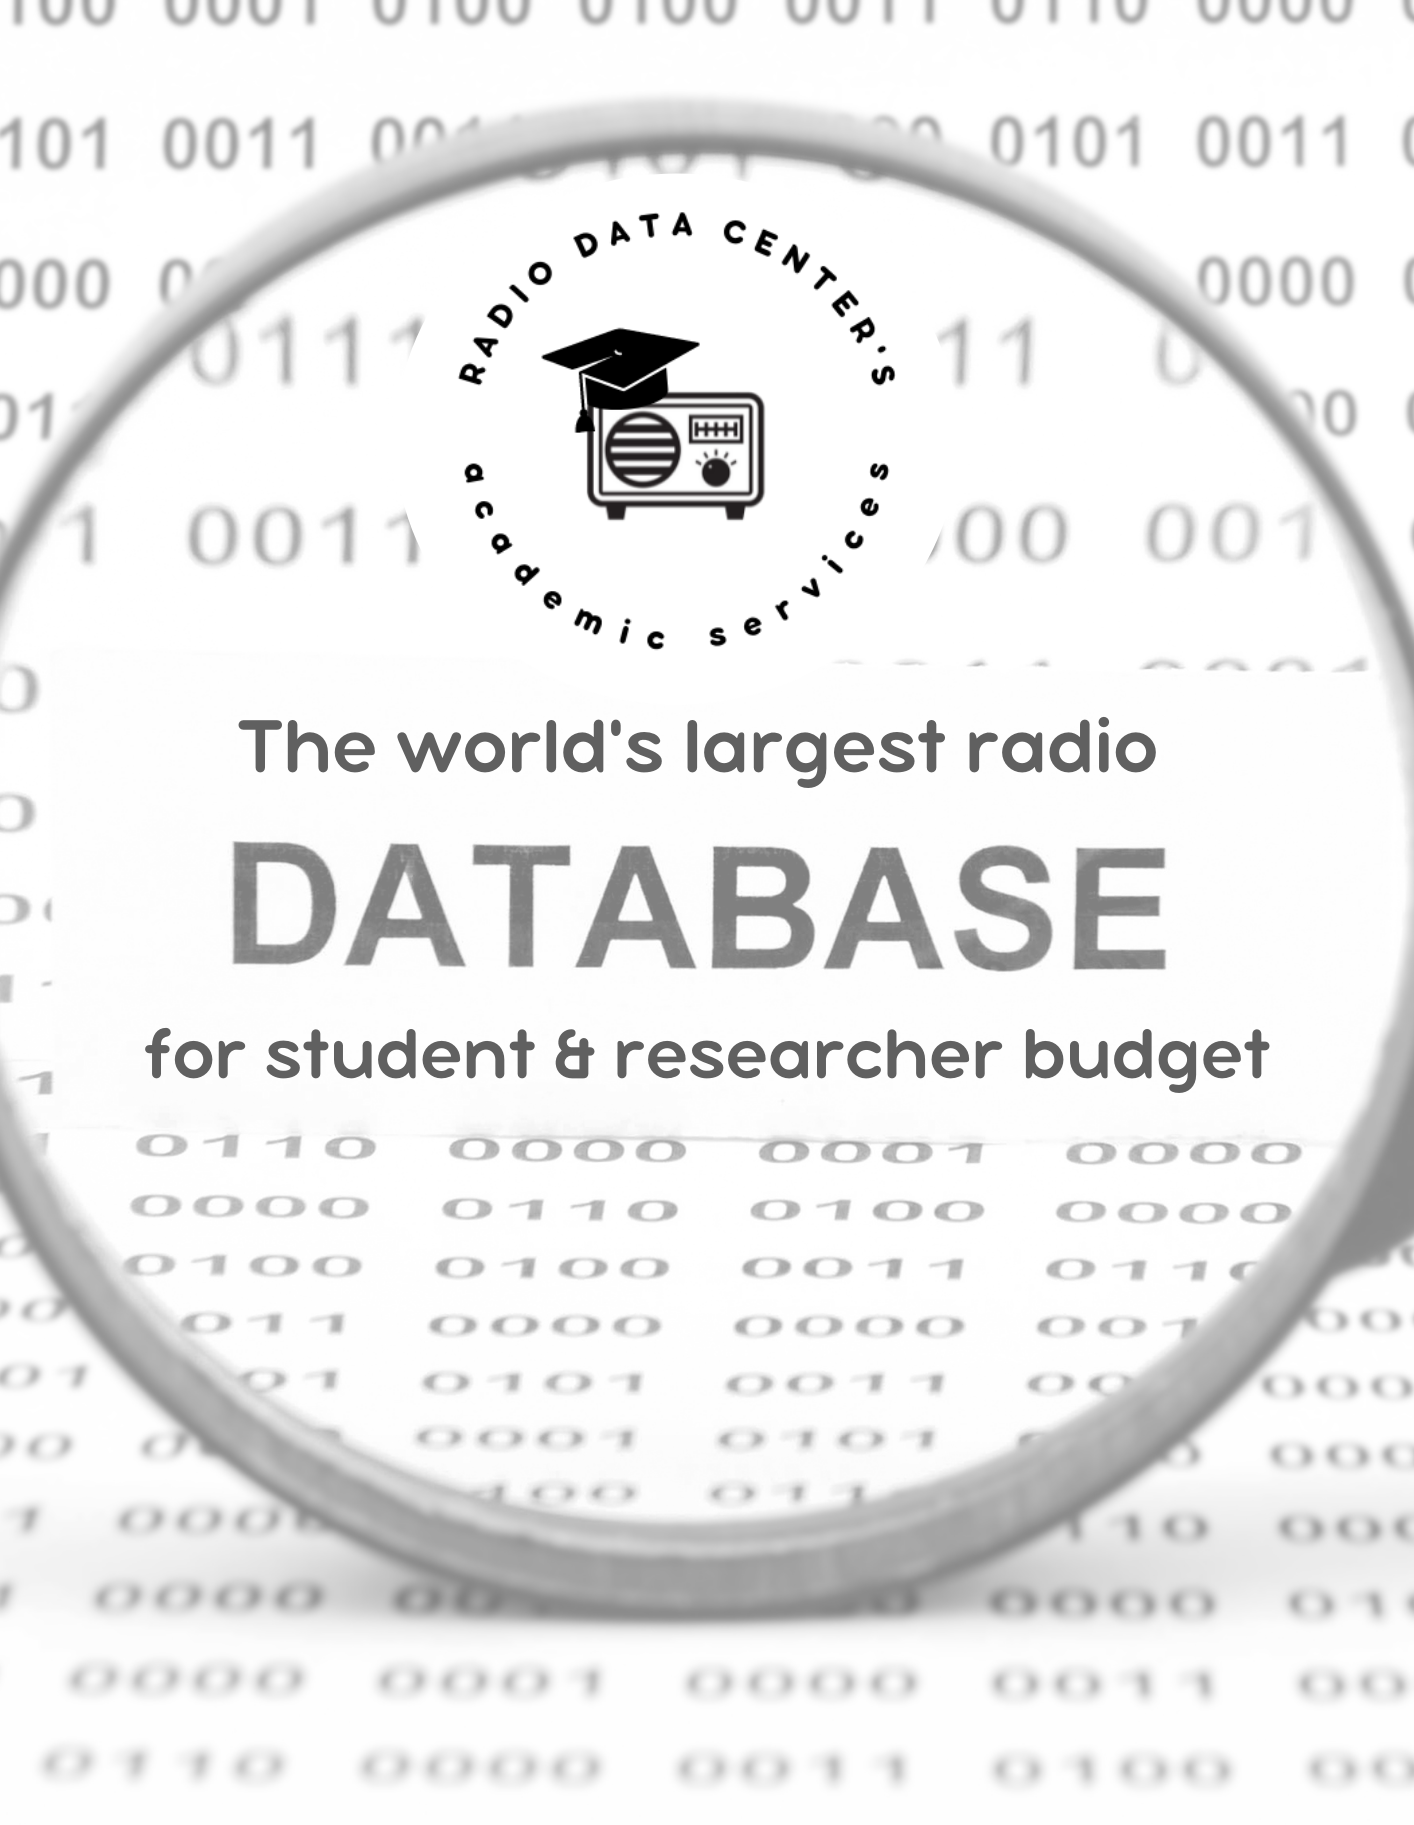 The world's largest database for students, professors and researchers